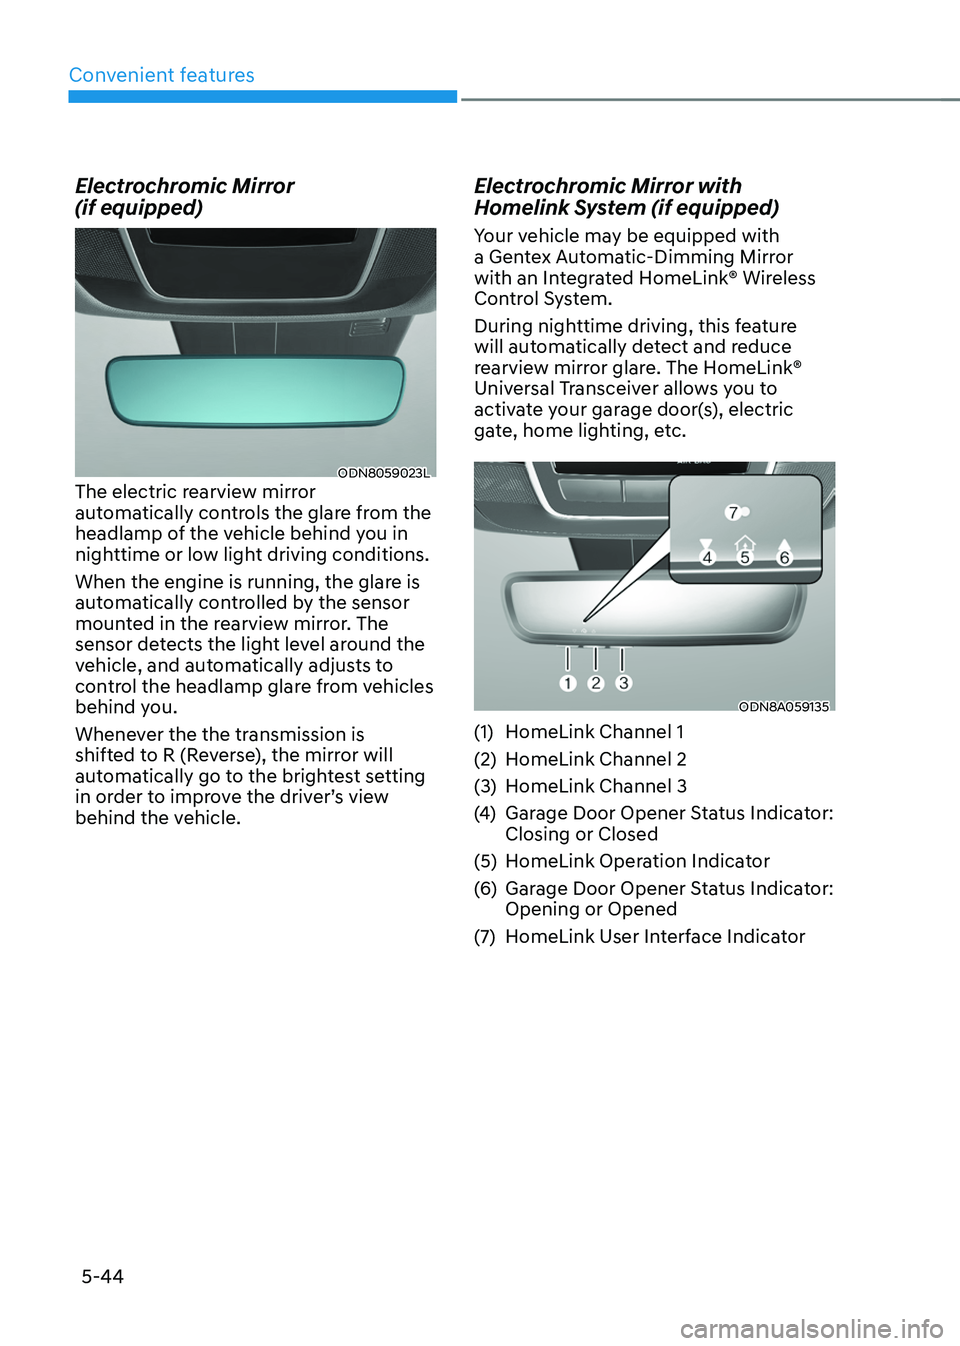 HYUNDAI TUCSON 2022  Owners Manual Convenient features
5-44
Electrochromic Mirror   
(if equipped)
ODN8059023LThe electric rearview mirror 
automatically controls the glare from the 
headlamp of the vehicle behind you in 
nighttime or 